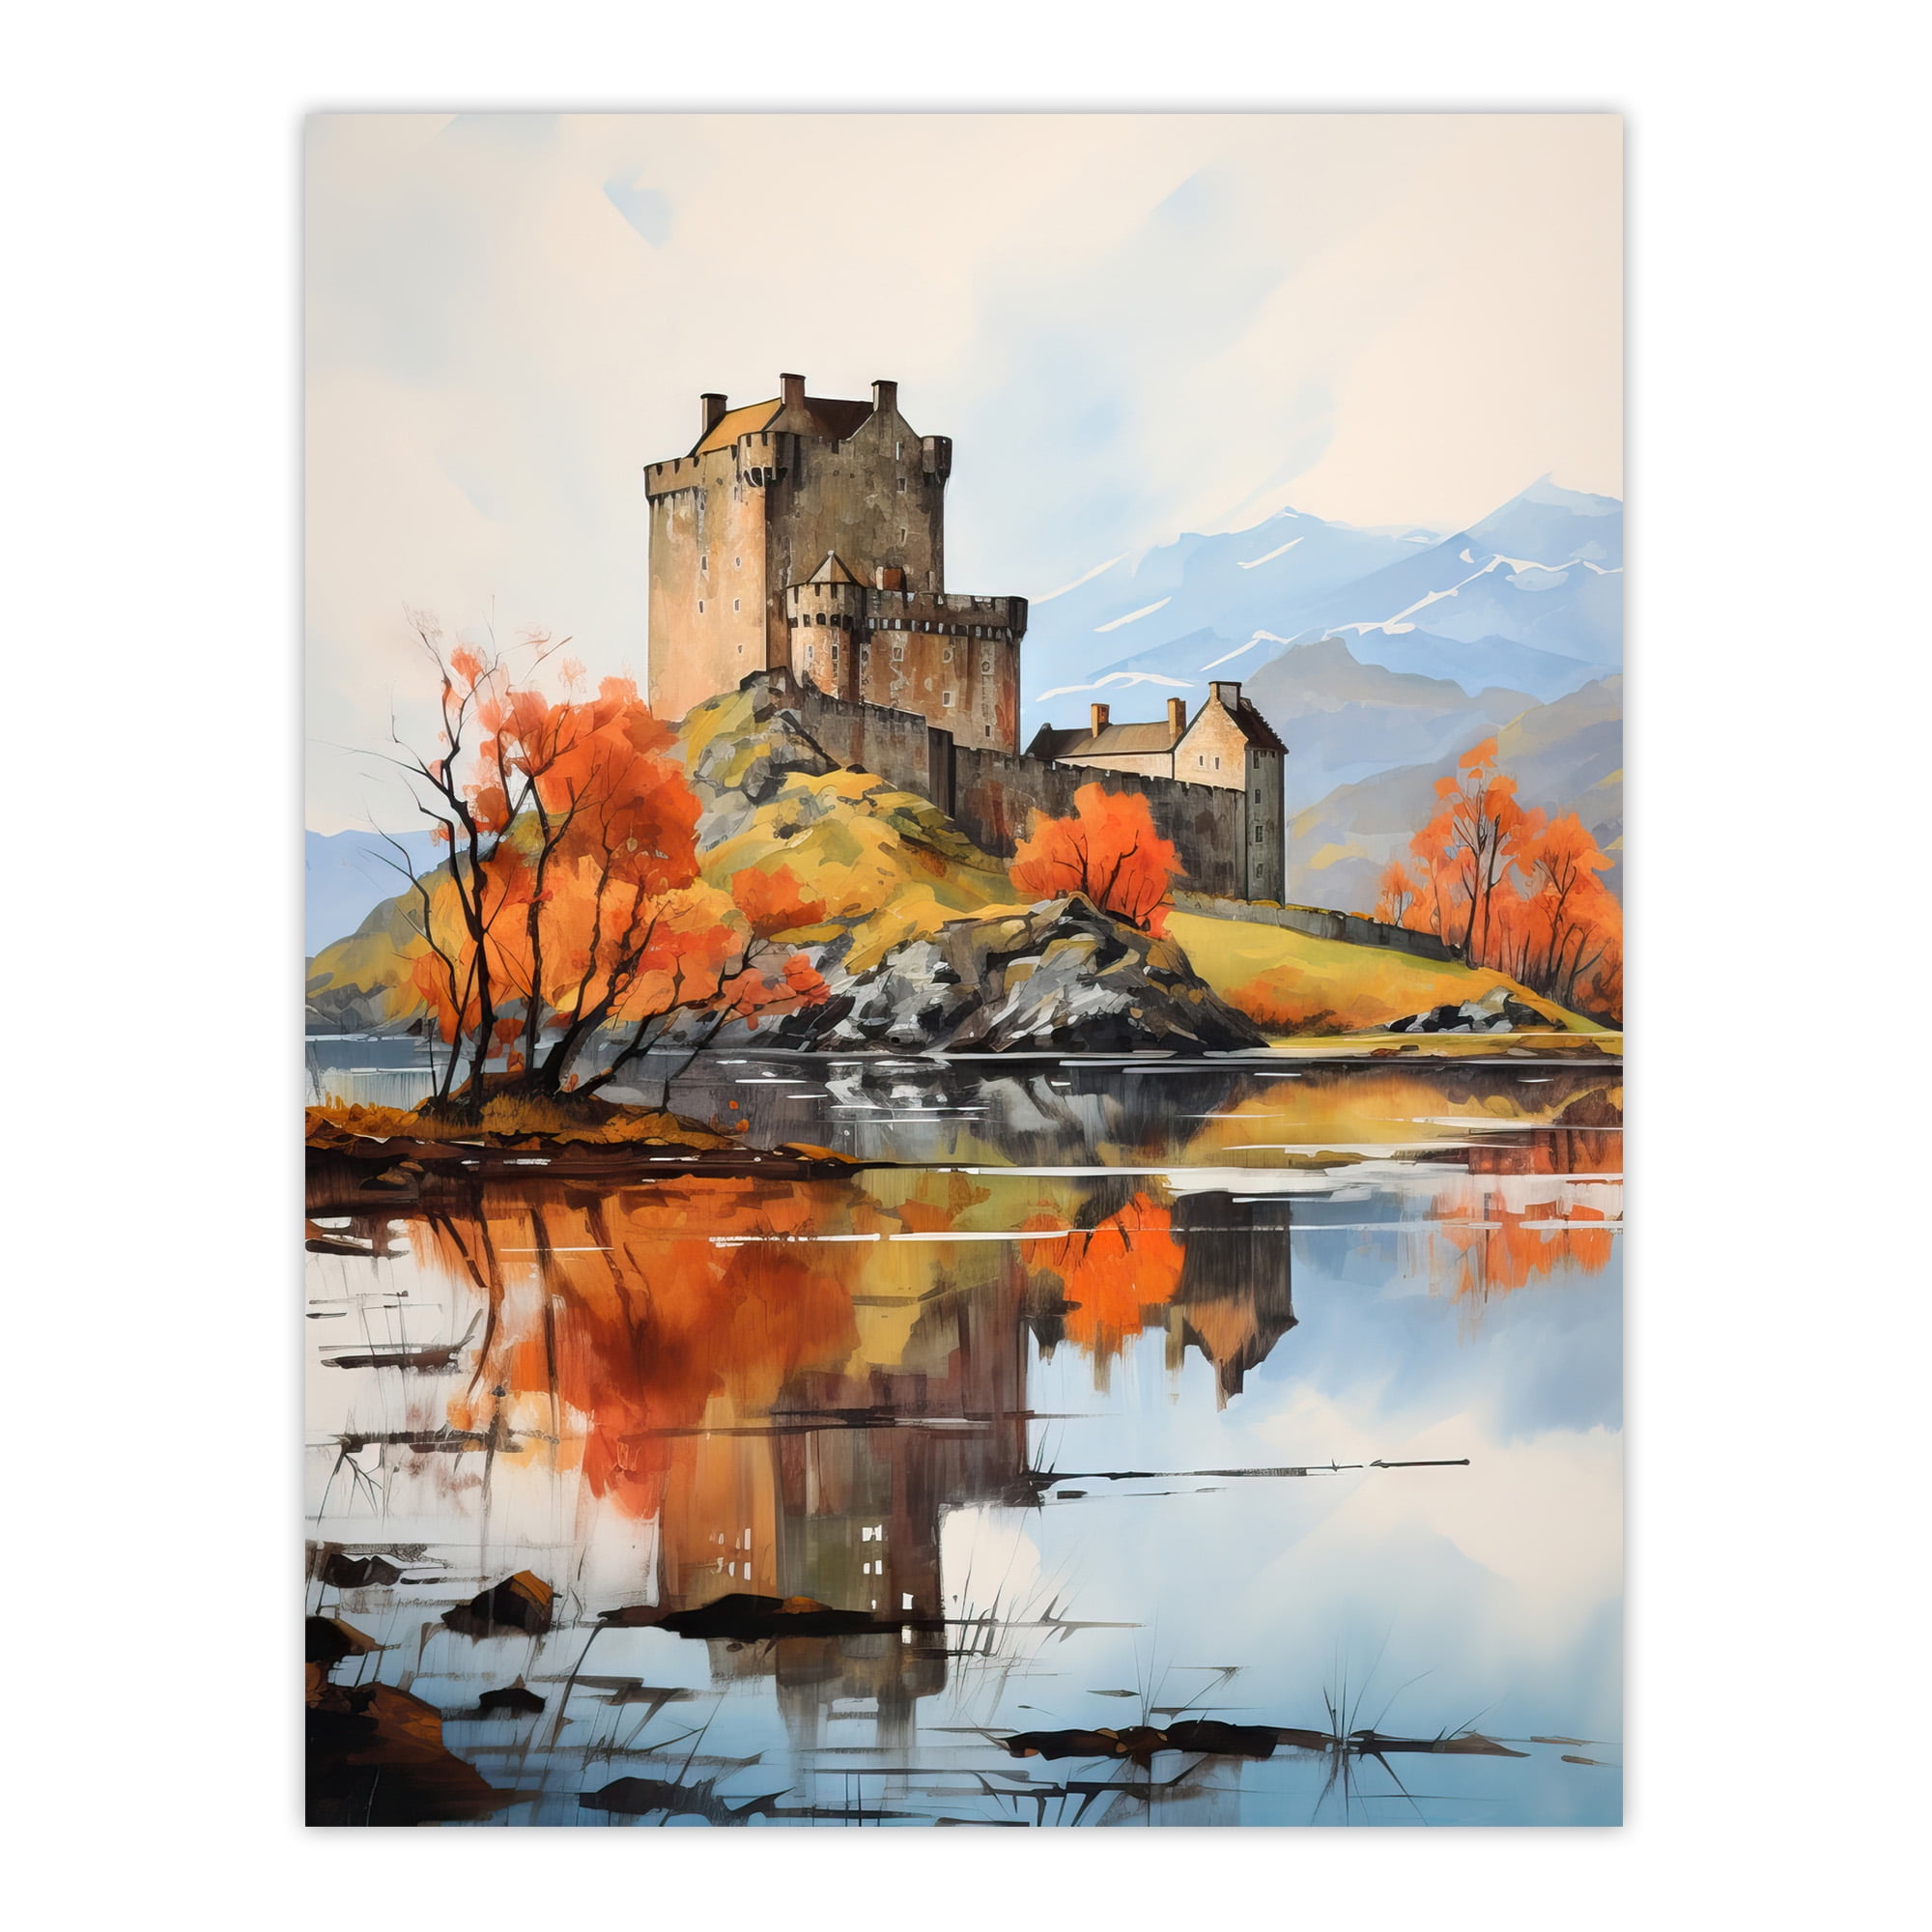 Eilean Donan Castle Scotland Watercolour Painting Misty Morning Autumn  Sunlight Large Wall Art Poster Print Thick Paper 18X24 Inch